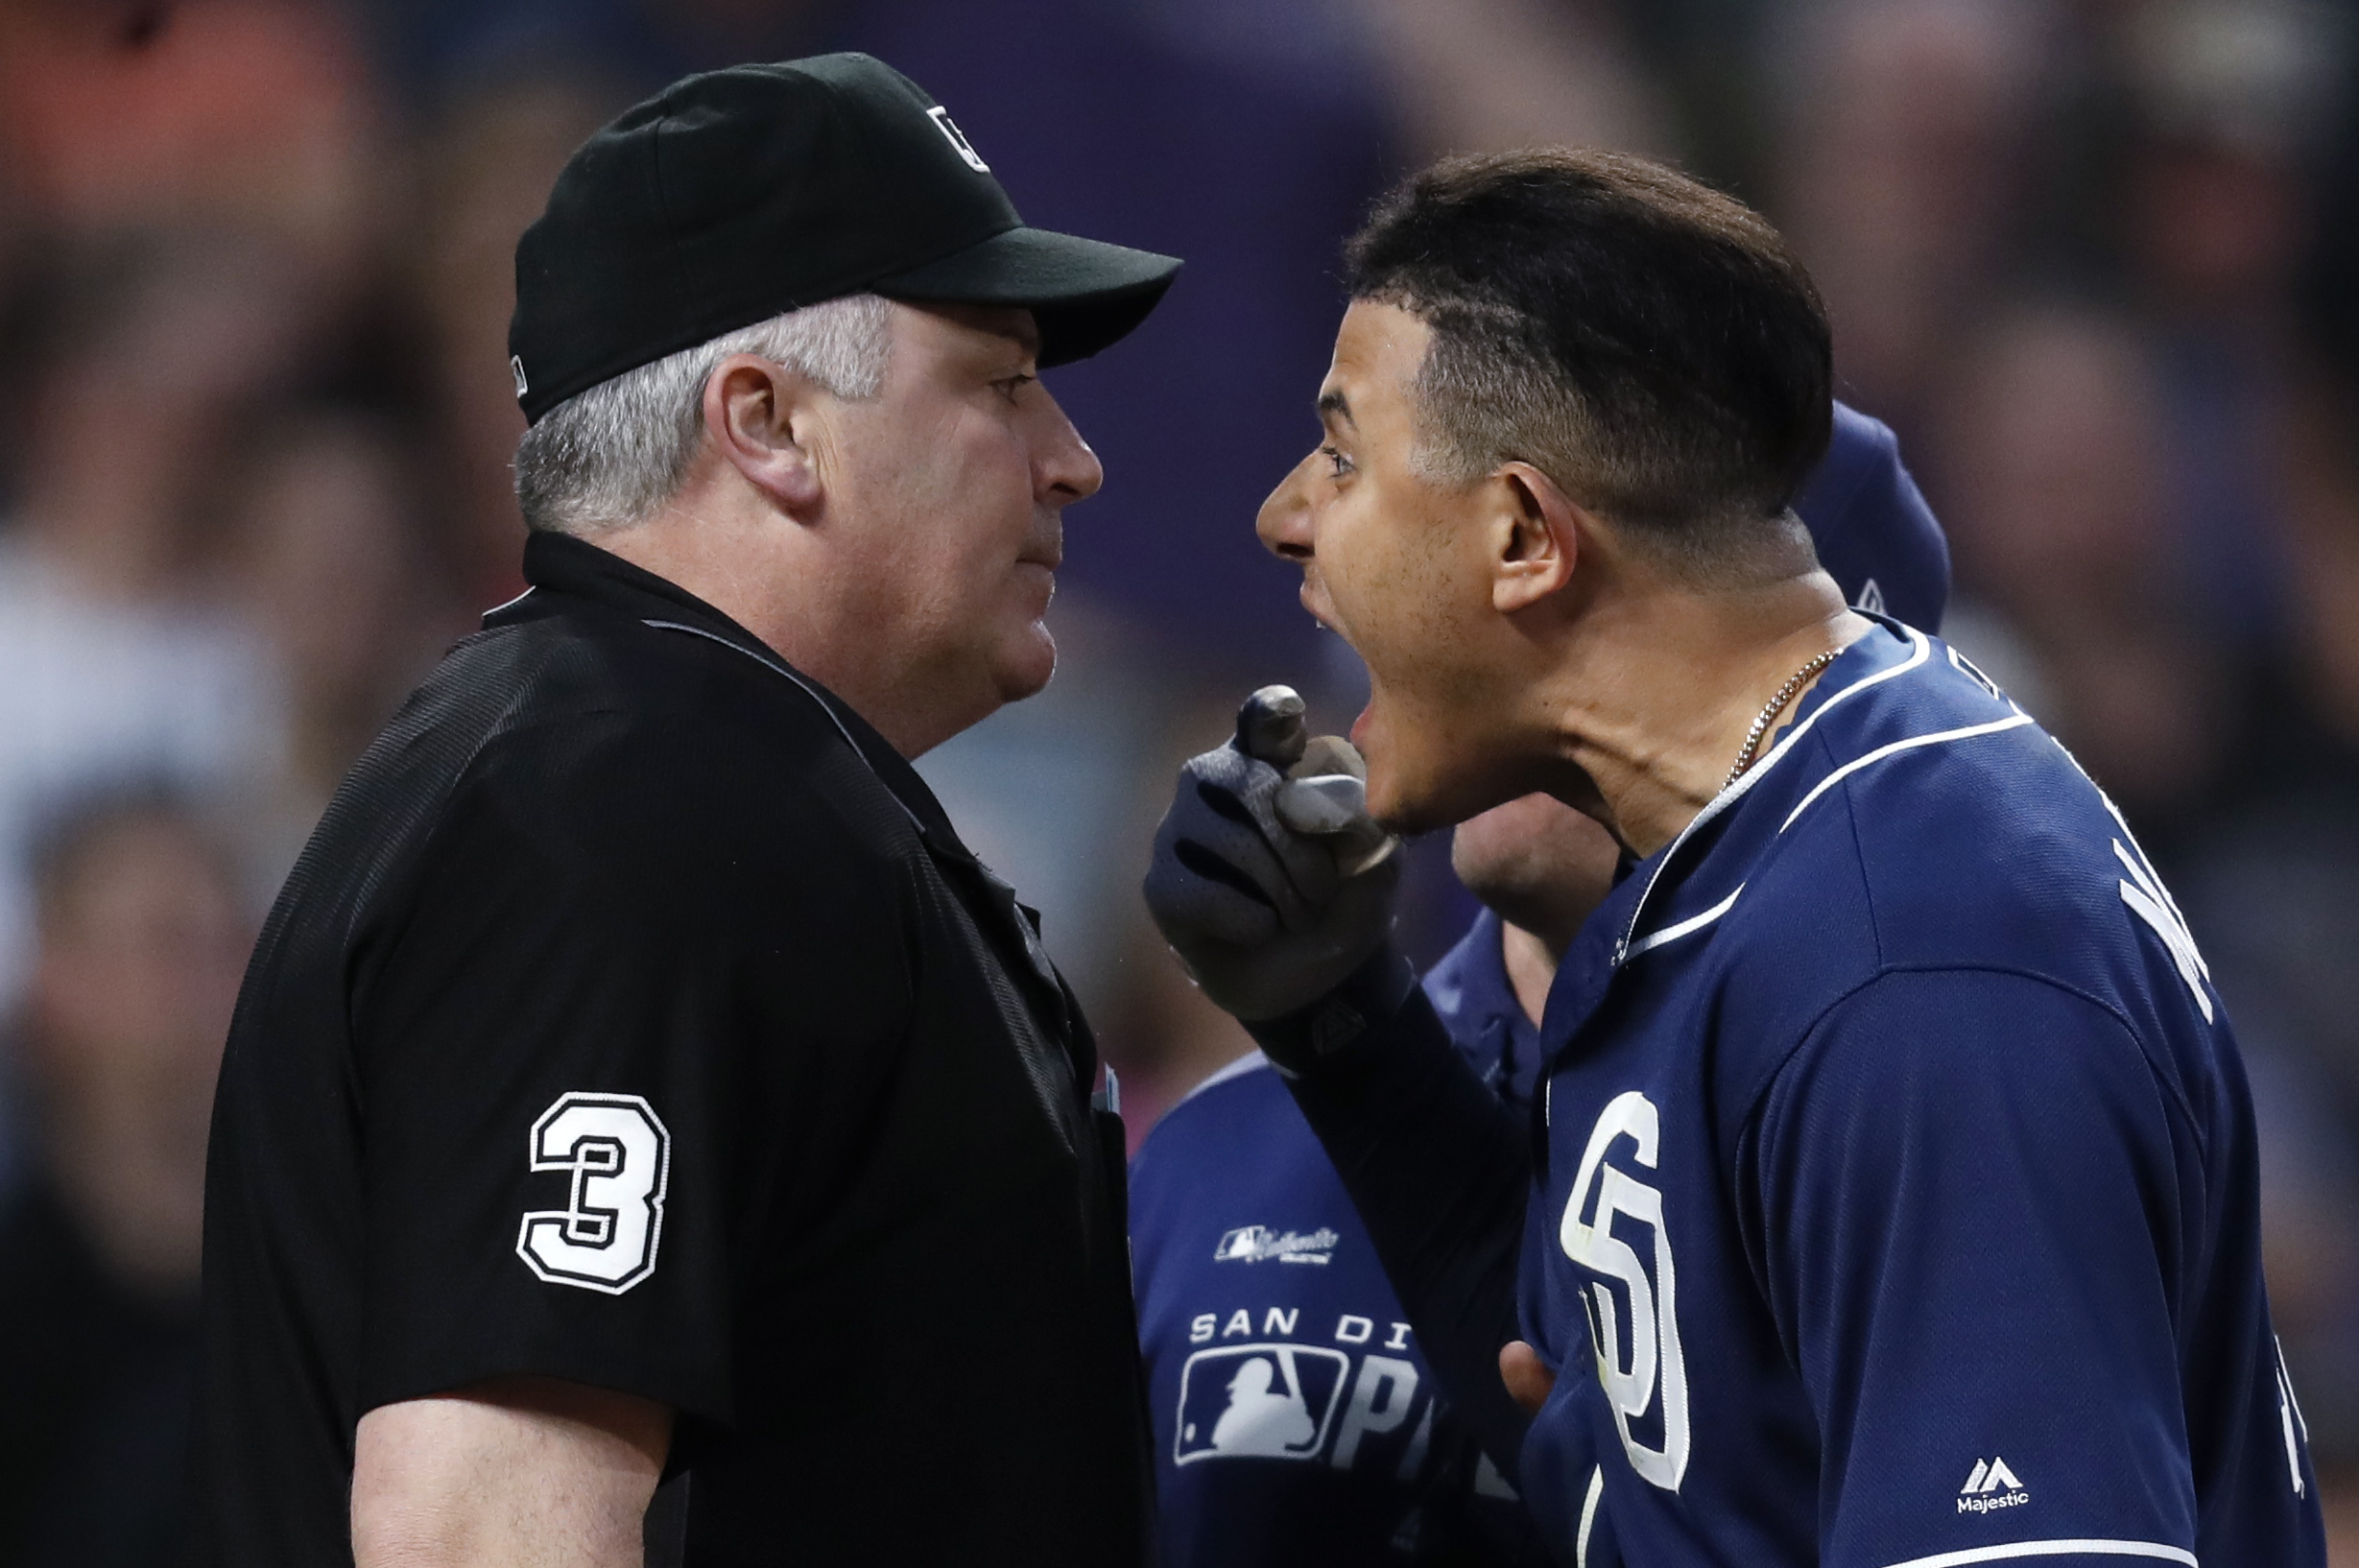 Manuel suspended 1 game for contact with ump - The San Diego Union-Tribune